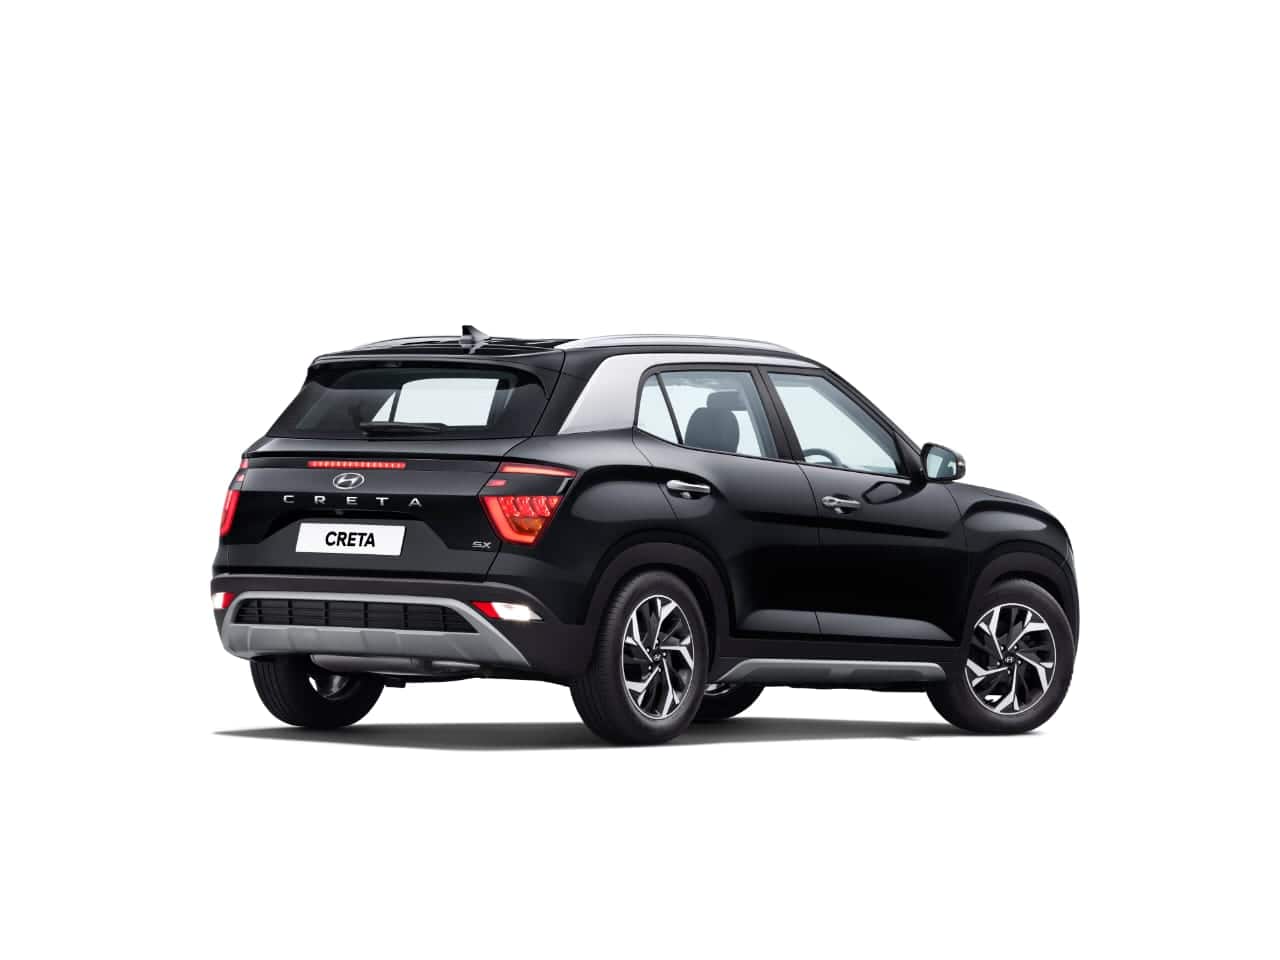 Hyundai Motor India, the country’s second biggest carmaker, clocked sales of 25,001 units in the domestic market in May 2021, recording a growth of 263 percent. In May 2020 the company had sold 6,883 units. (Image: Hyundai)